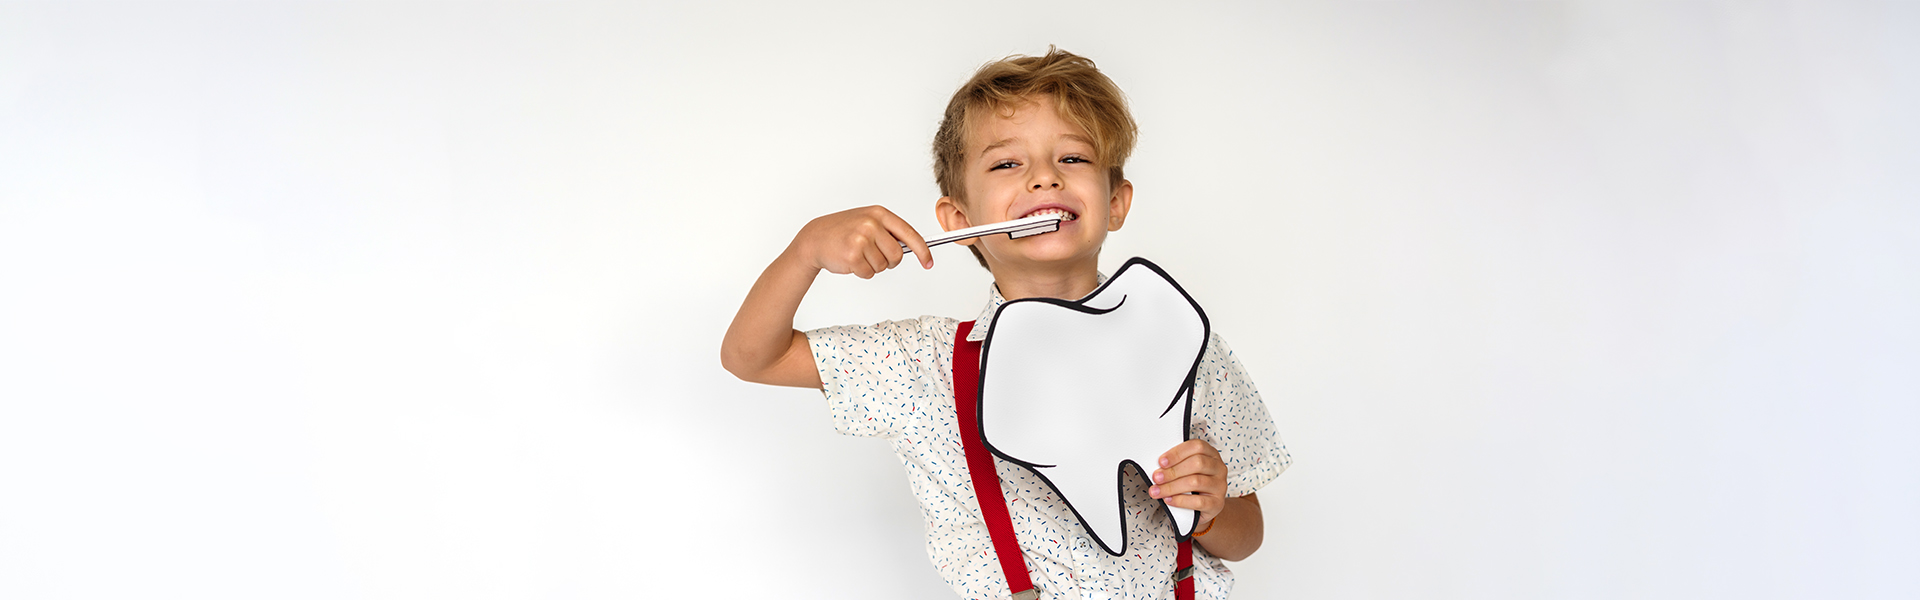 Improve Your Brushing and Flossing Habits with These Tips